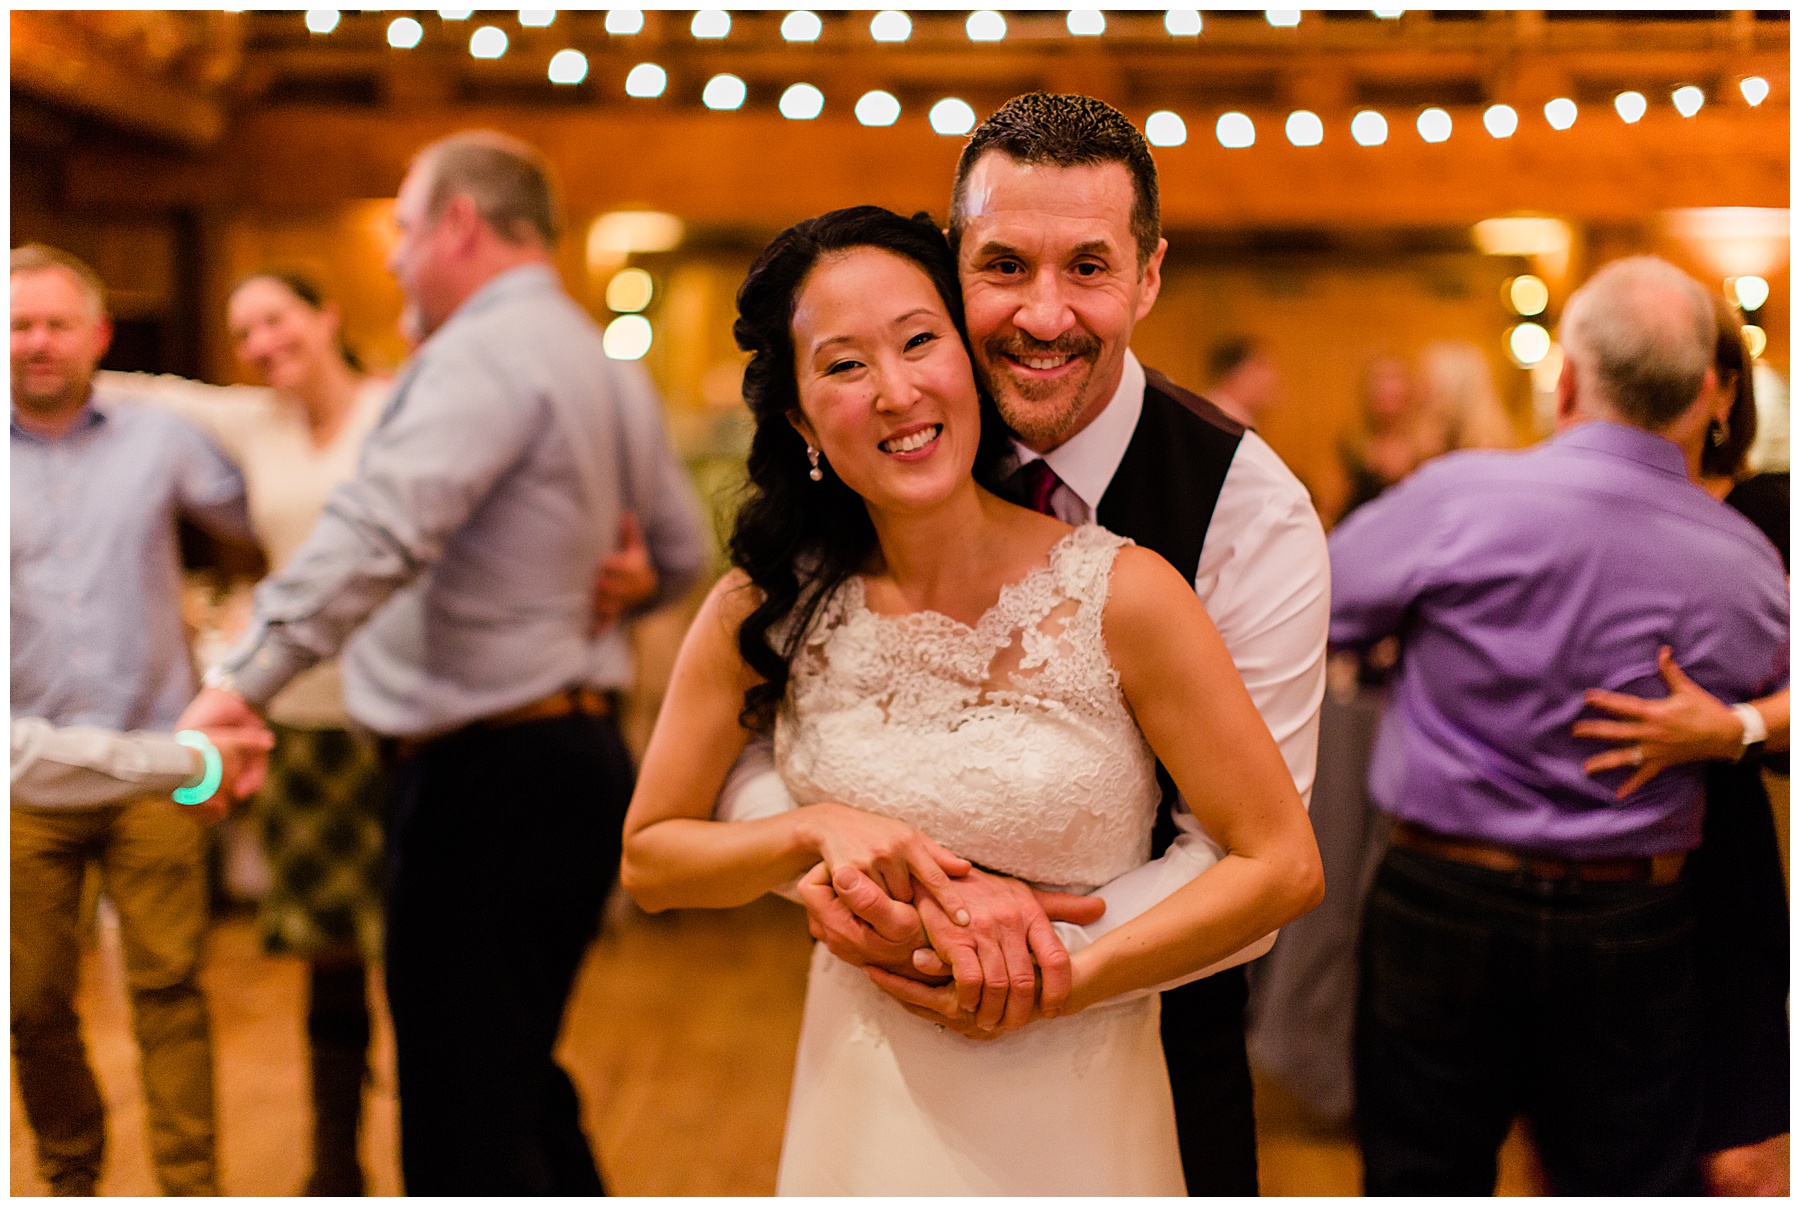 The couple hugs eachother with big smiles for the camera at their Sunriver Resort Fall Riverfront Wedding